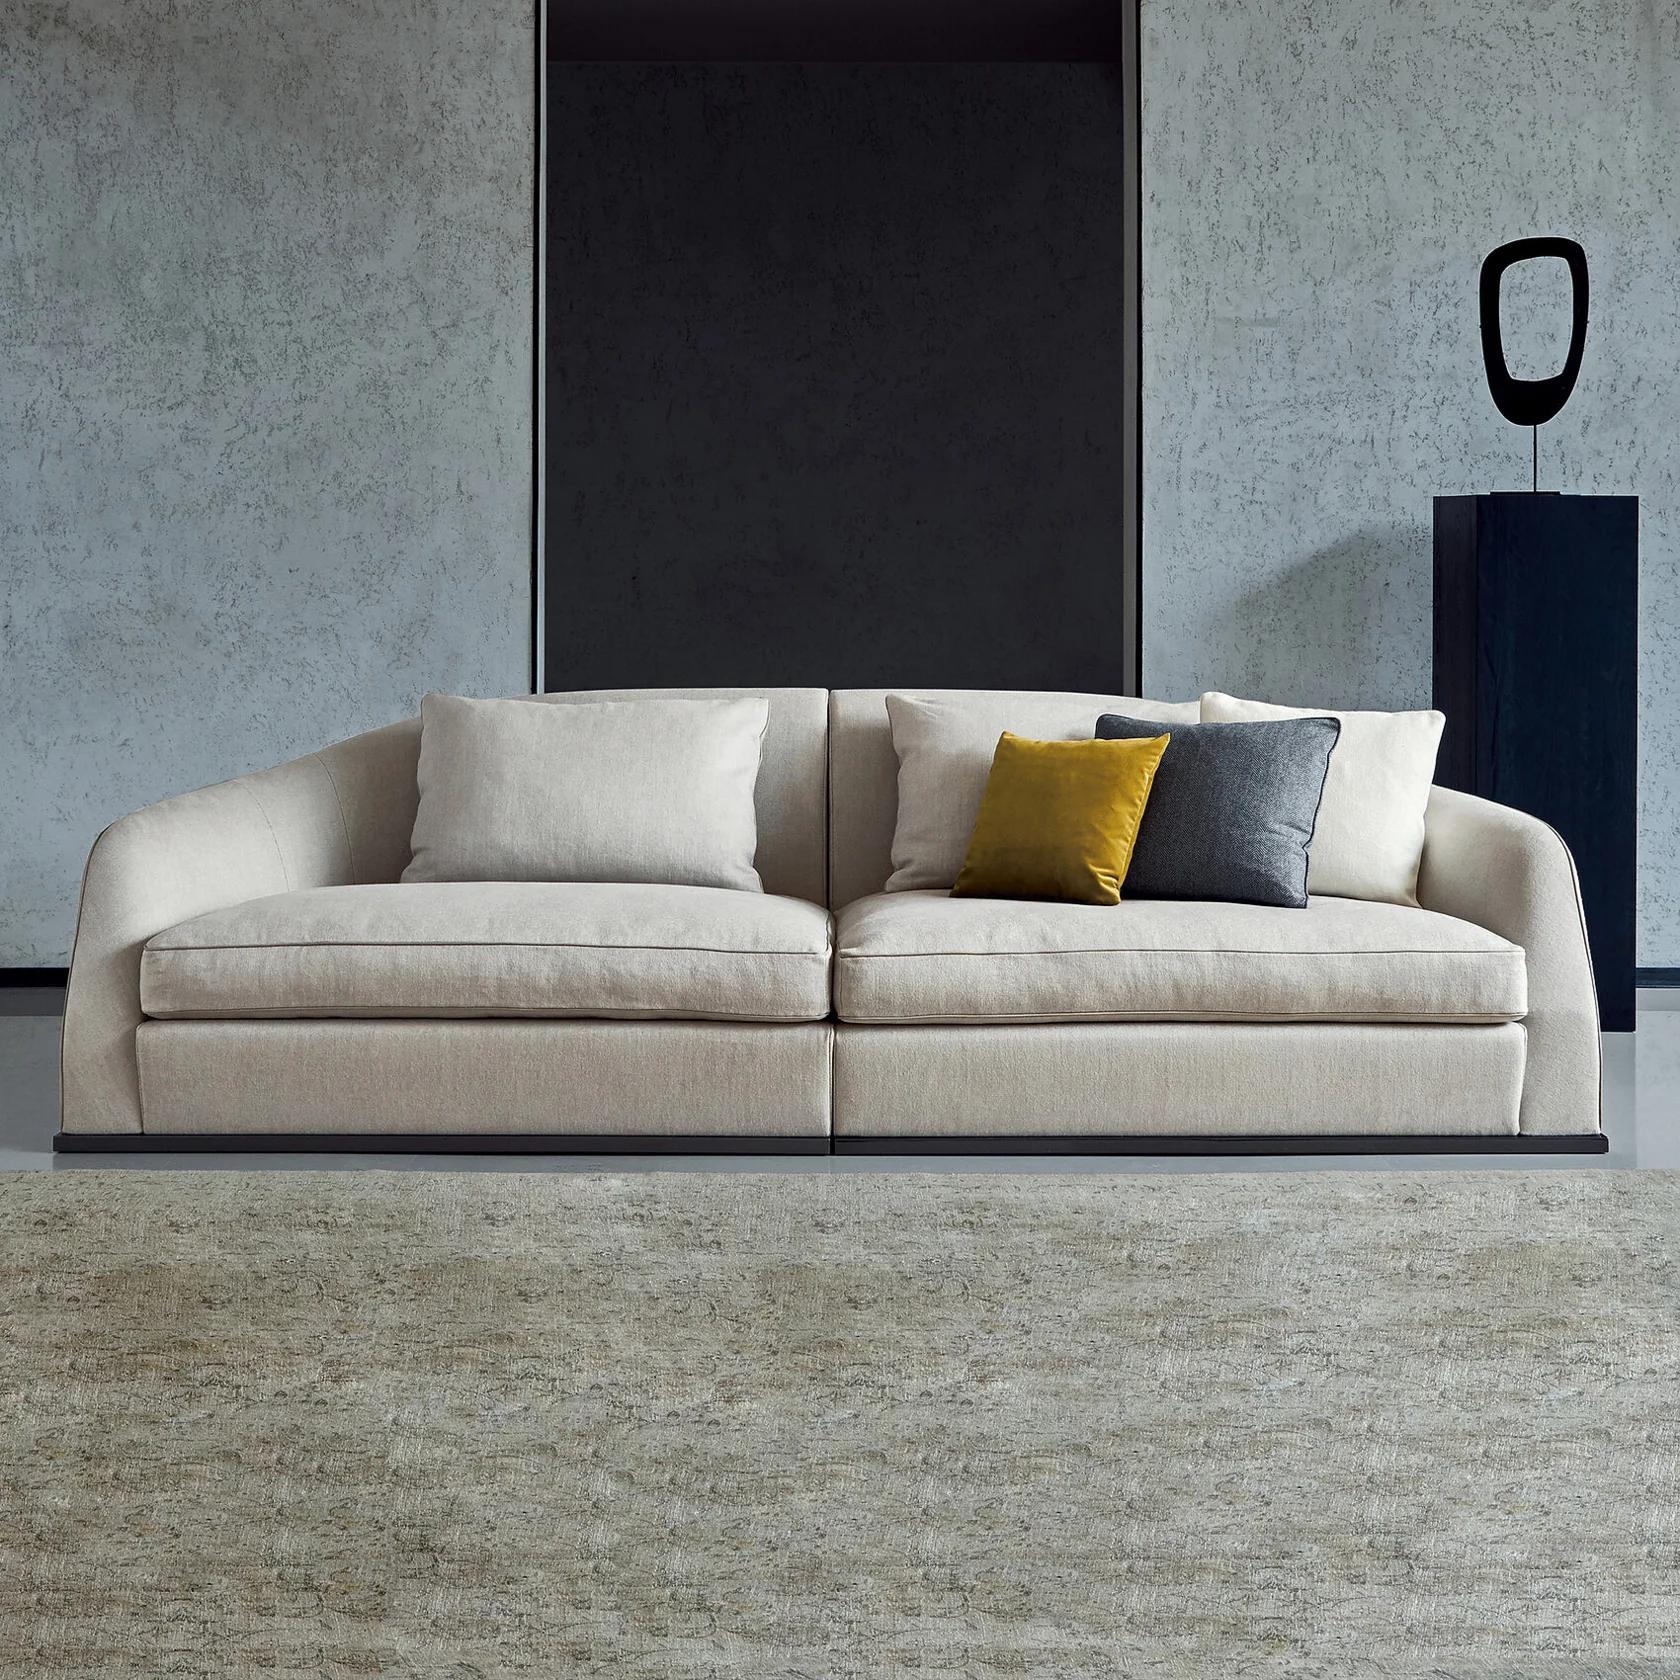 ALFRED Stand-alone sofas | Design Made in Italy - Flexform